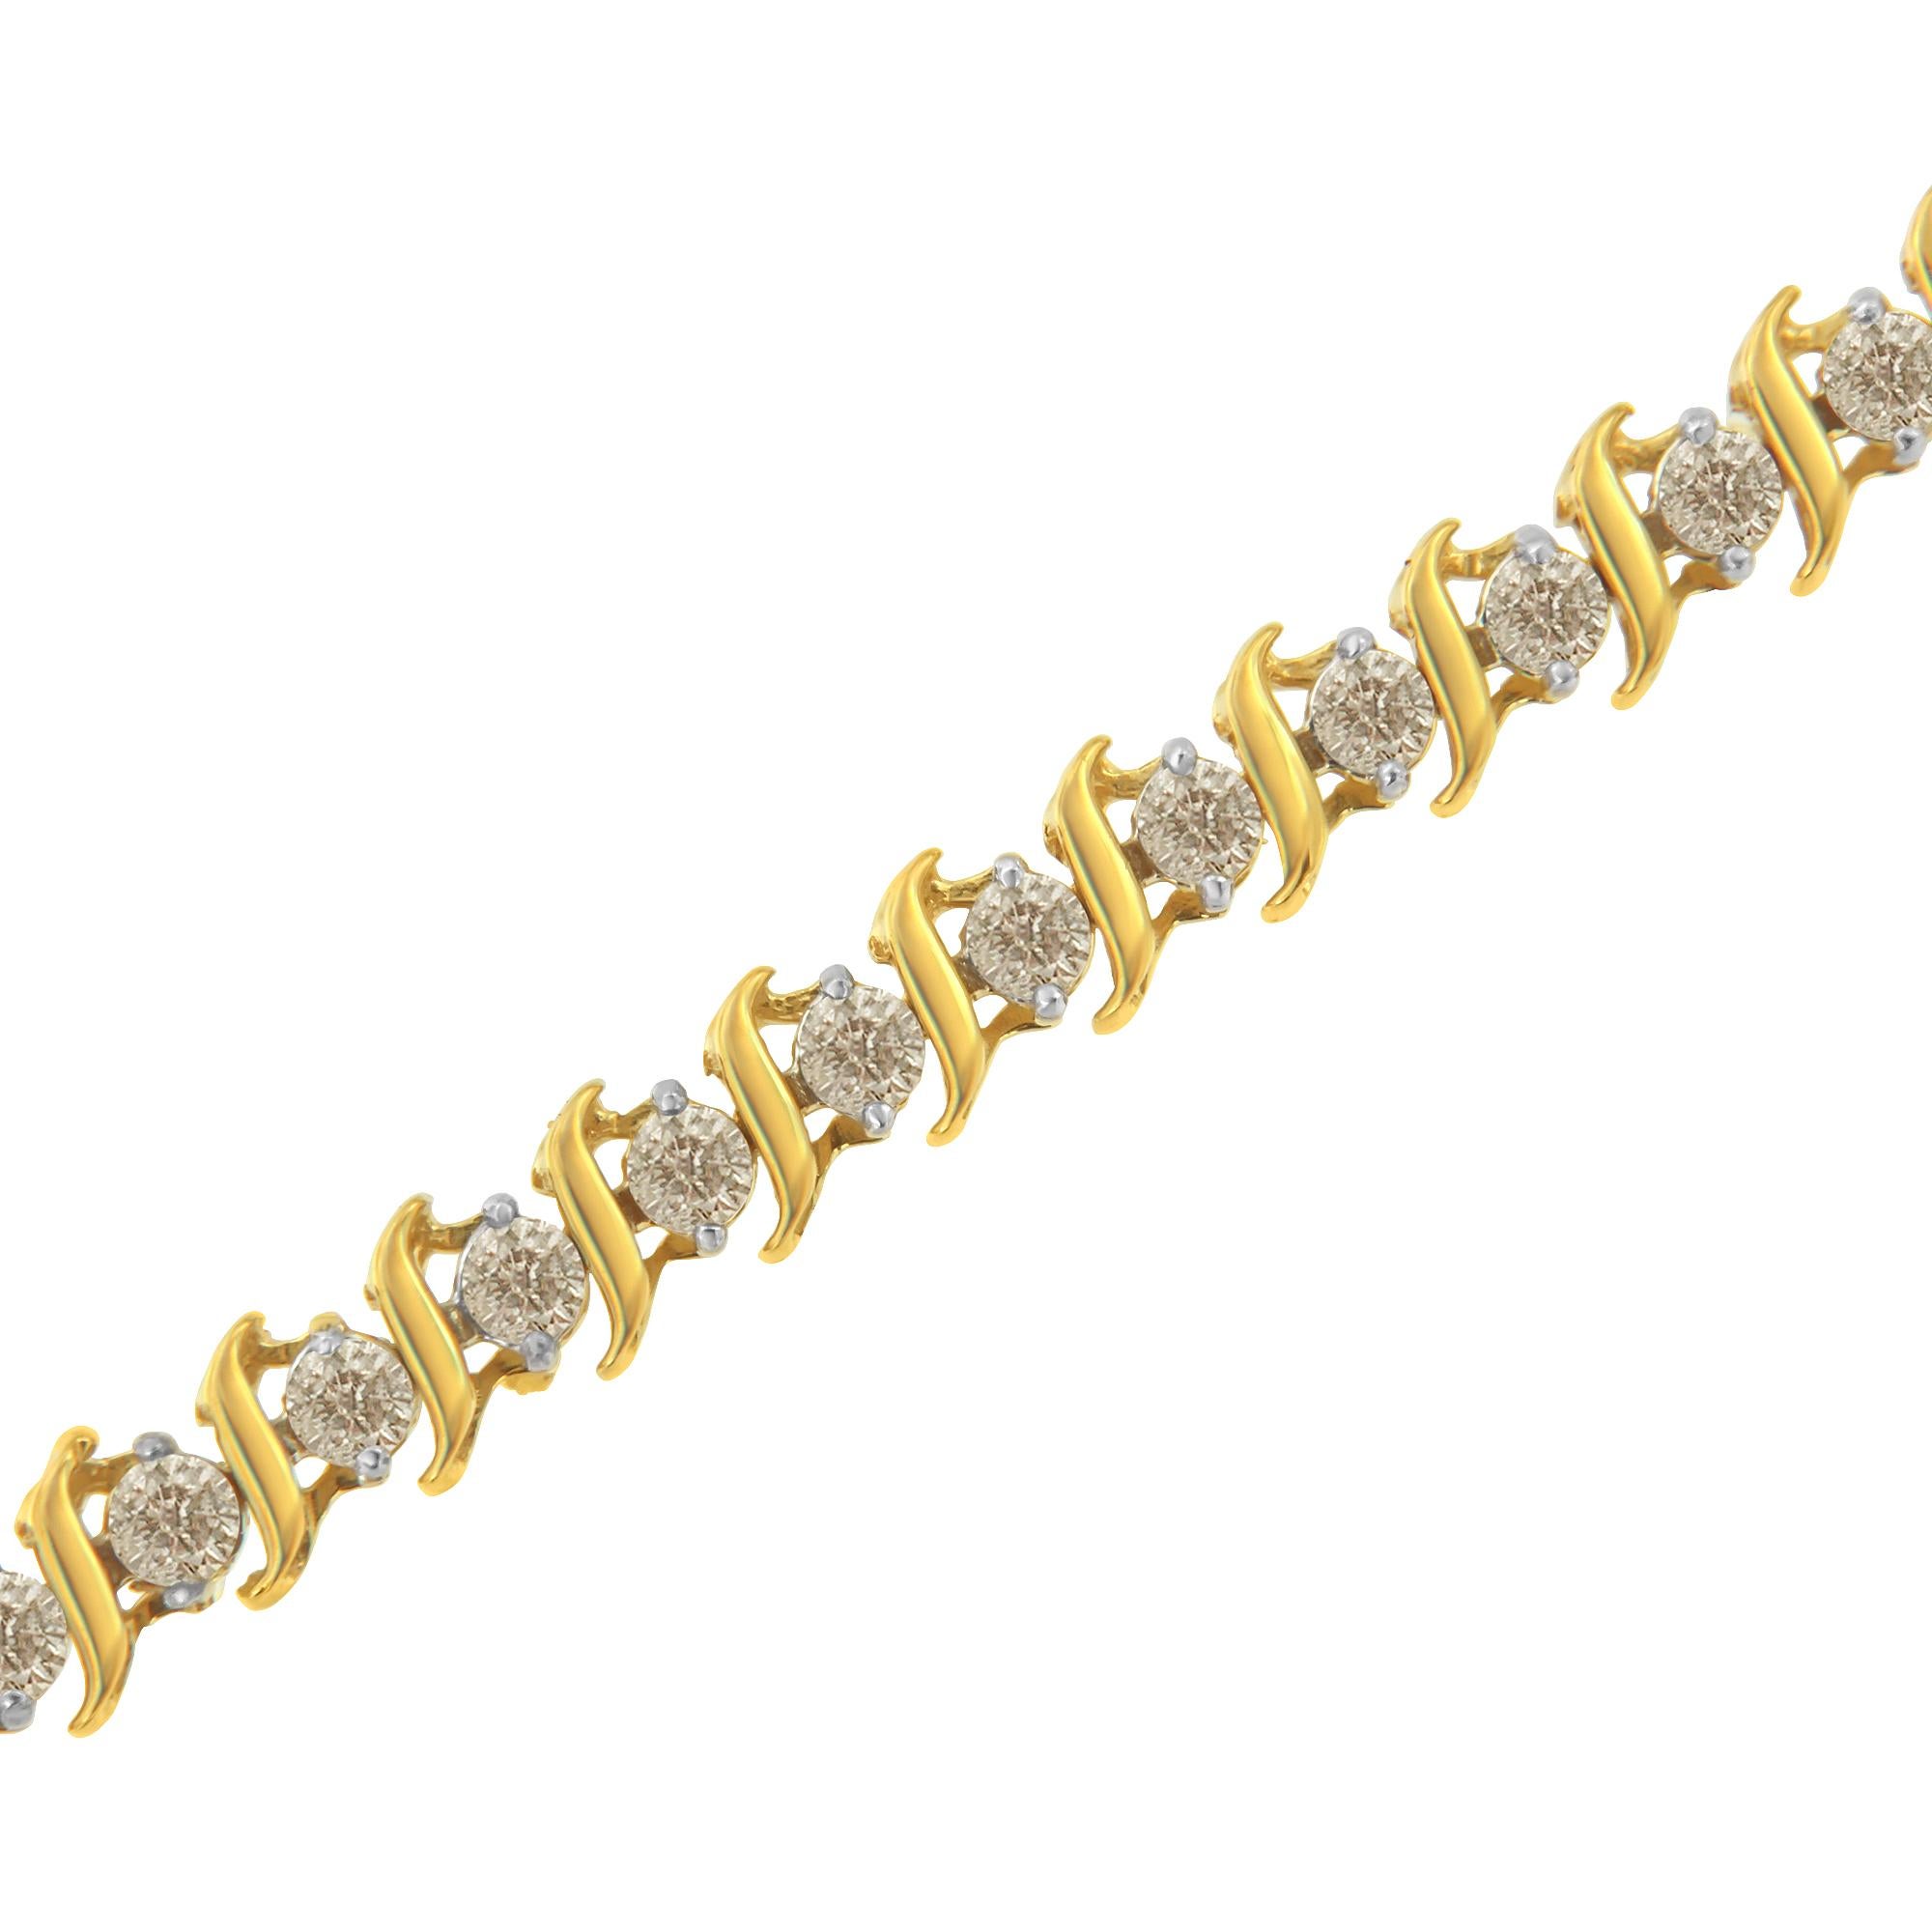 Elegant and timeless, this luxe tennis bracelet boasts an impressive 2.0 carat total weight of round cut diamonds. It features S shaped waves of 10K yellow gold plated gold alternated with round diamonds in two prong settings. The bracelet has a